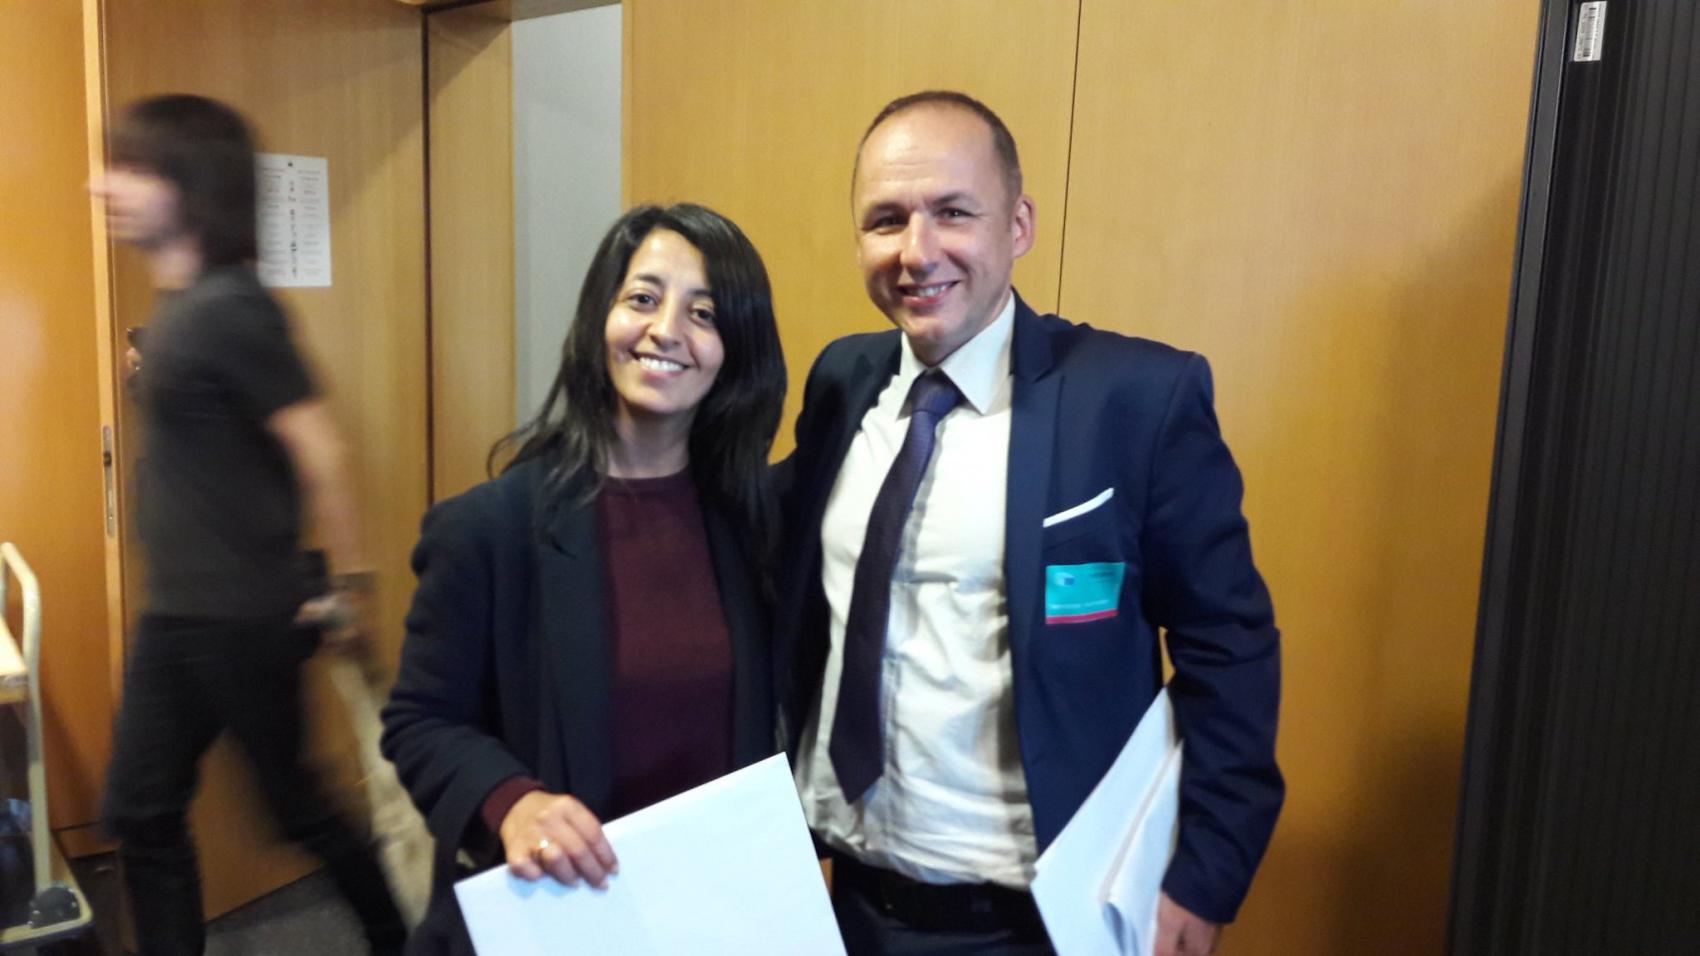 Advocacy Director Adam Bodor giving the EU Cycling Strategy to the Chair Karima Delli